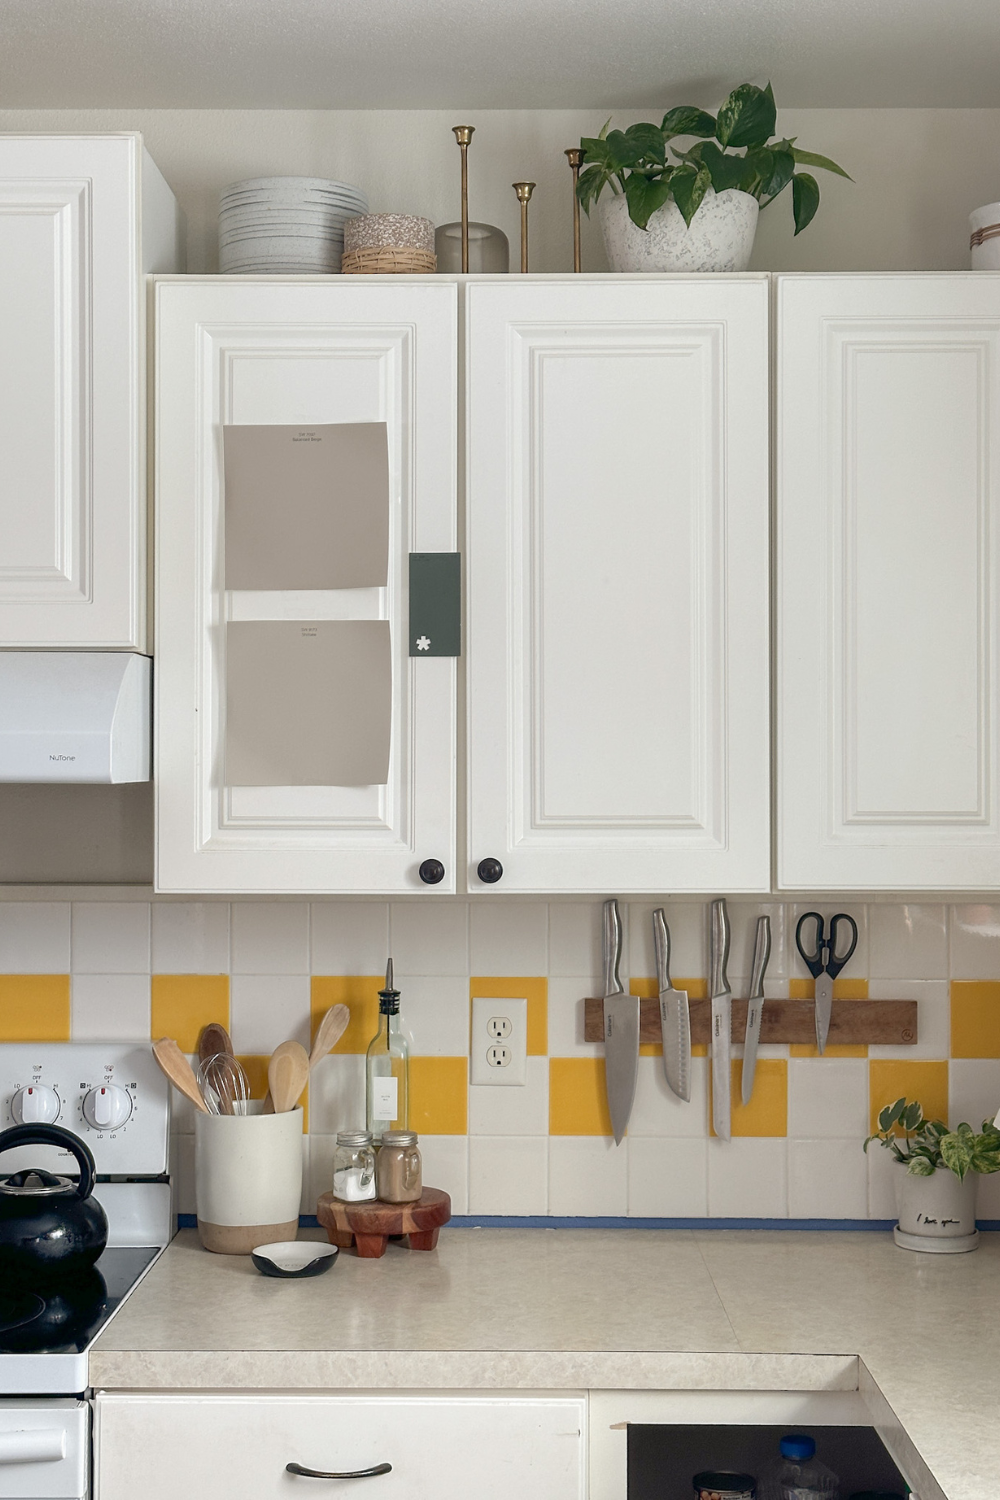 How to Choose a Kitchen Cabinet Color